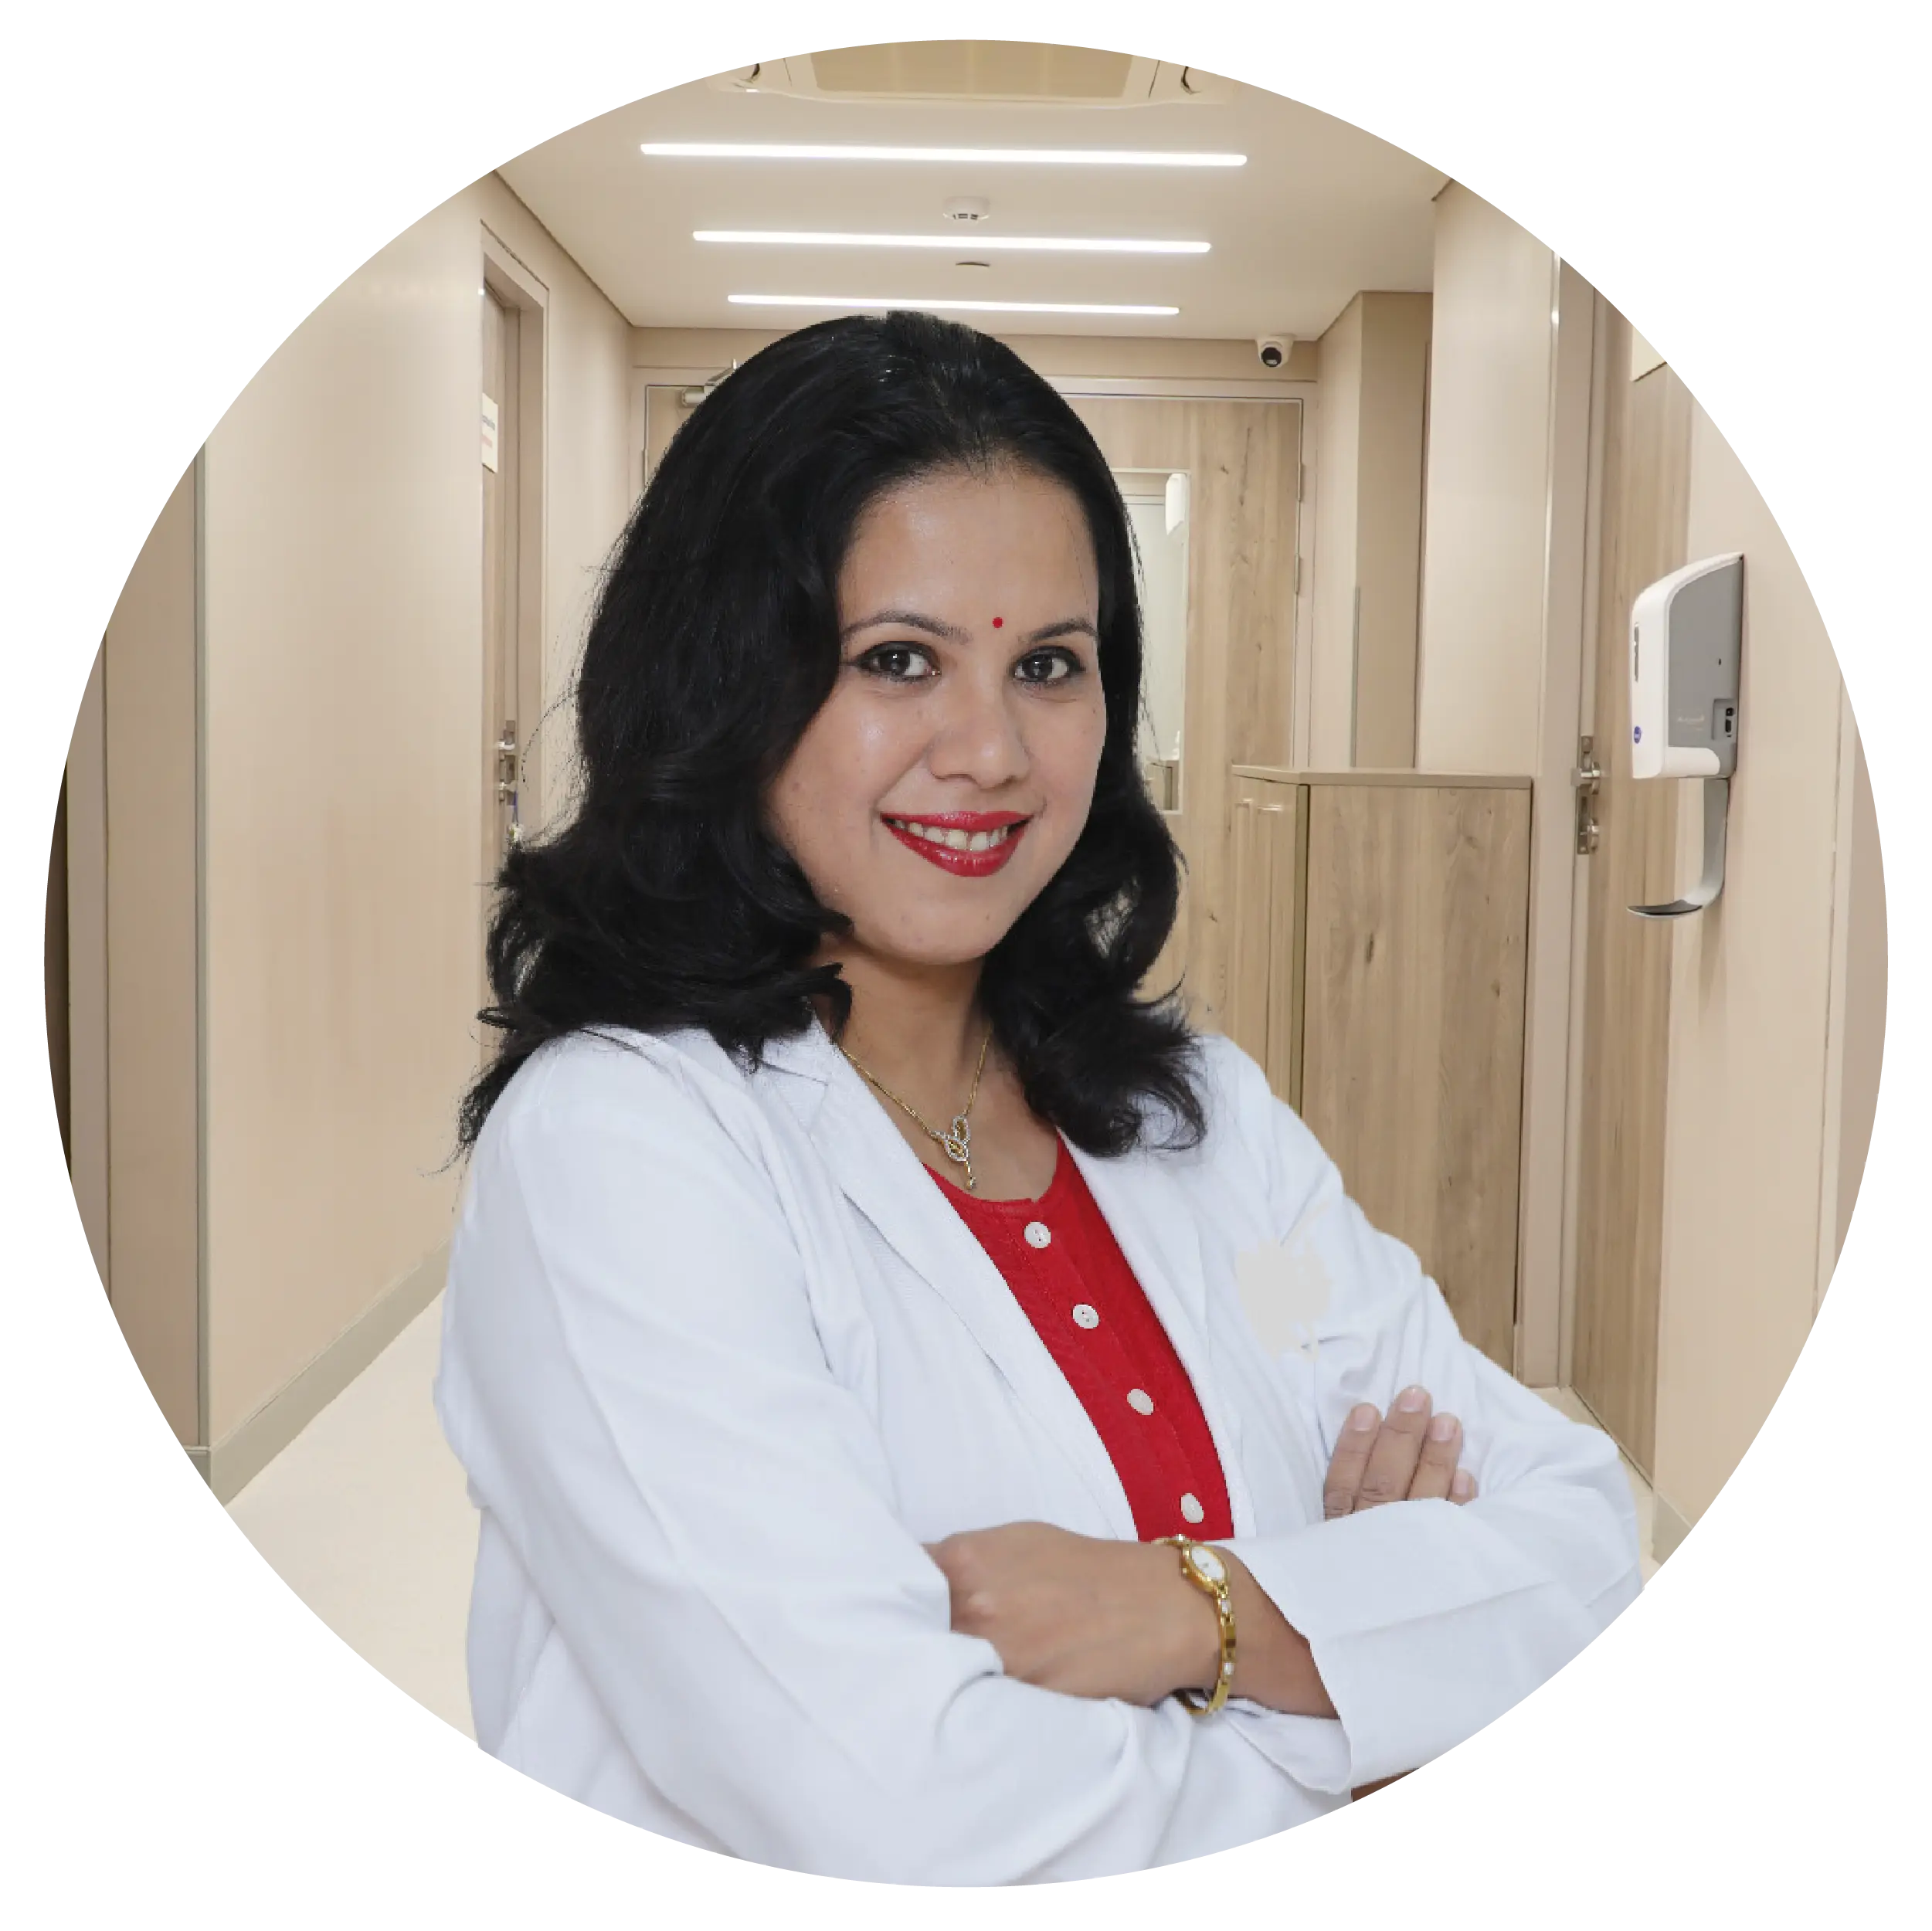 Dr. Sonal Chouksey